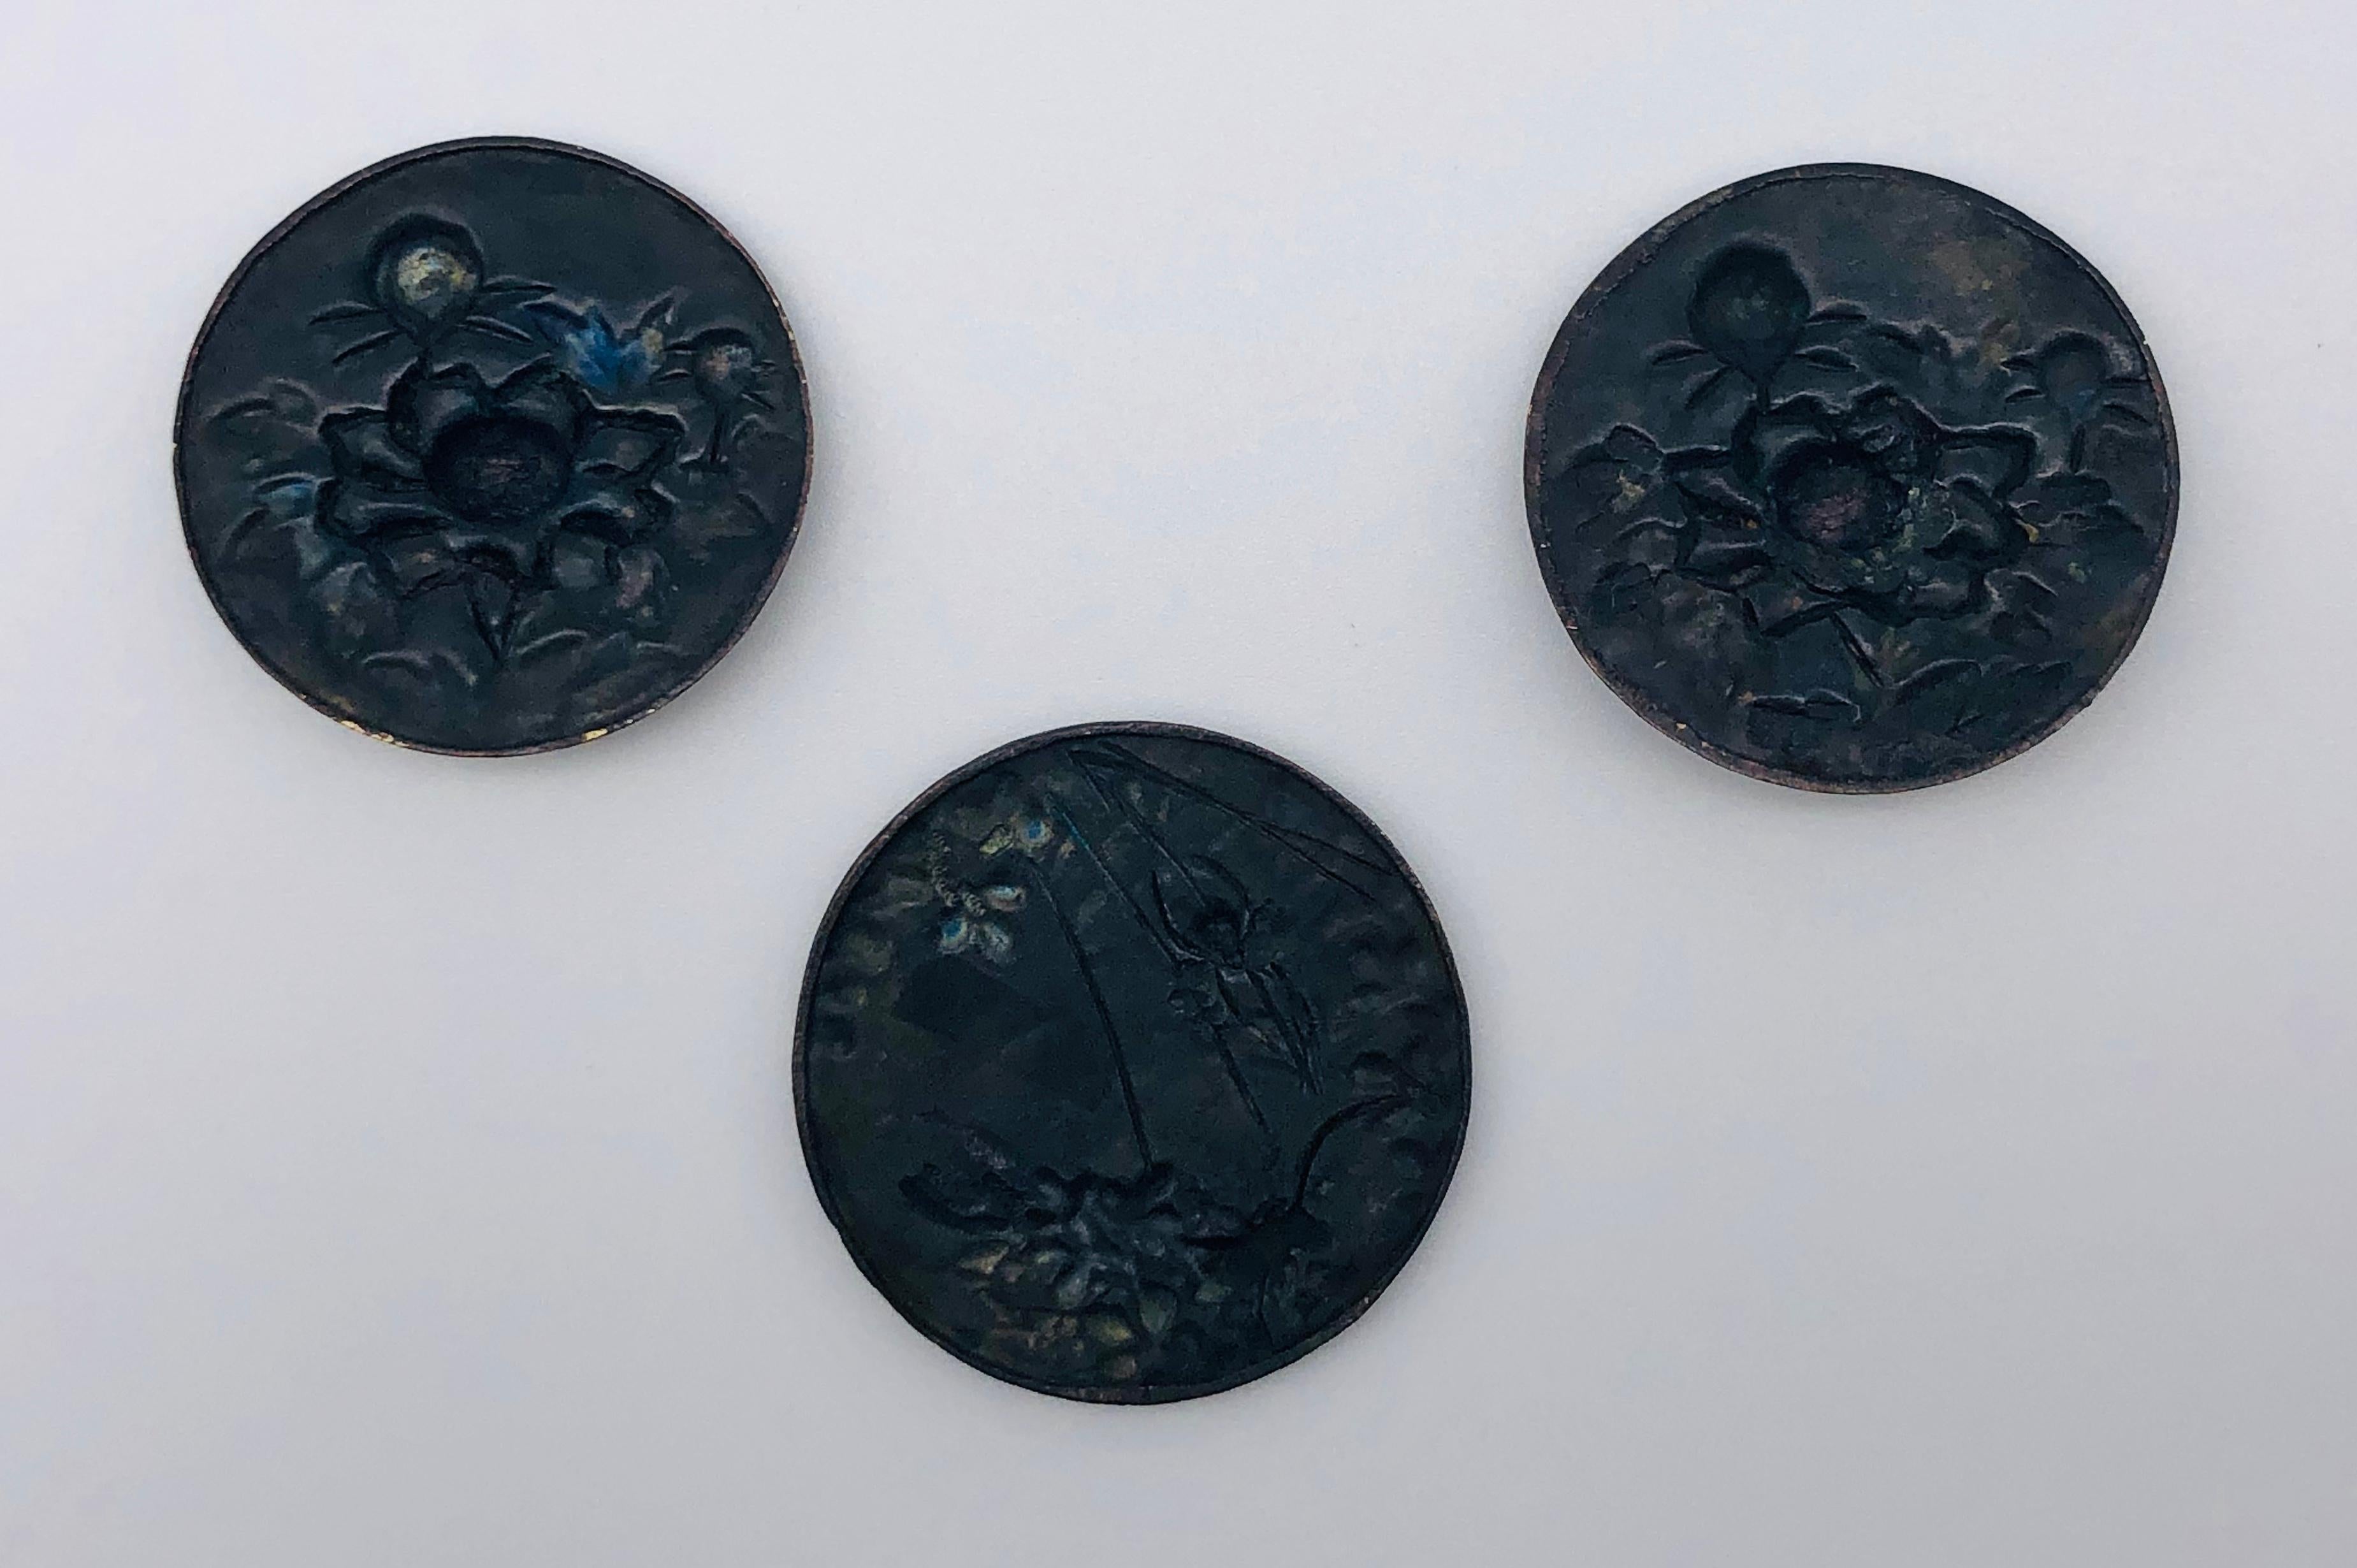 Two plaques are identical showing three peonies. One plaque, slightly larger, shows a butterfly, a grasshopper and a spider in its net. The three plaques are fine examples of Shakudo work dating from the 2nd half of the 19th century.

Diameter two